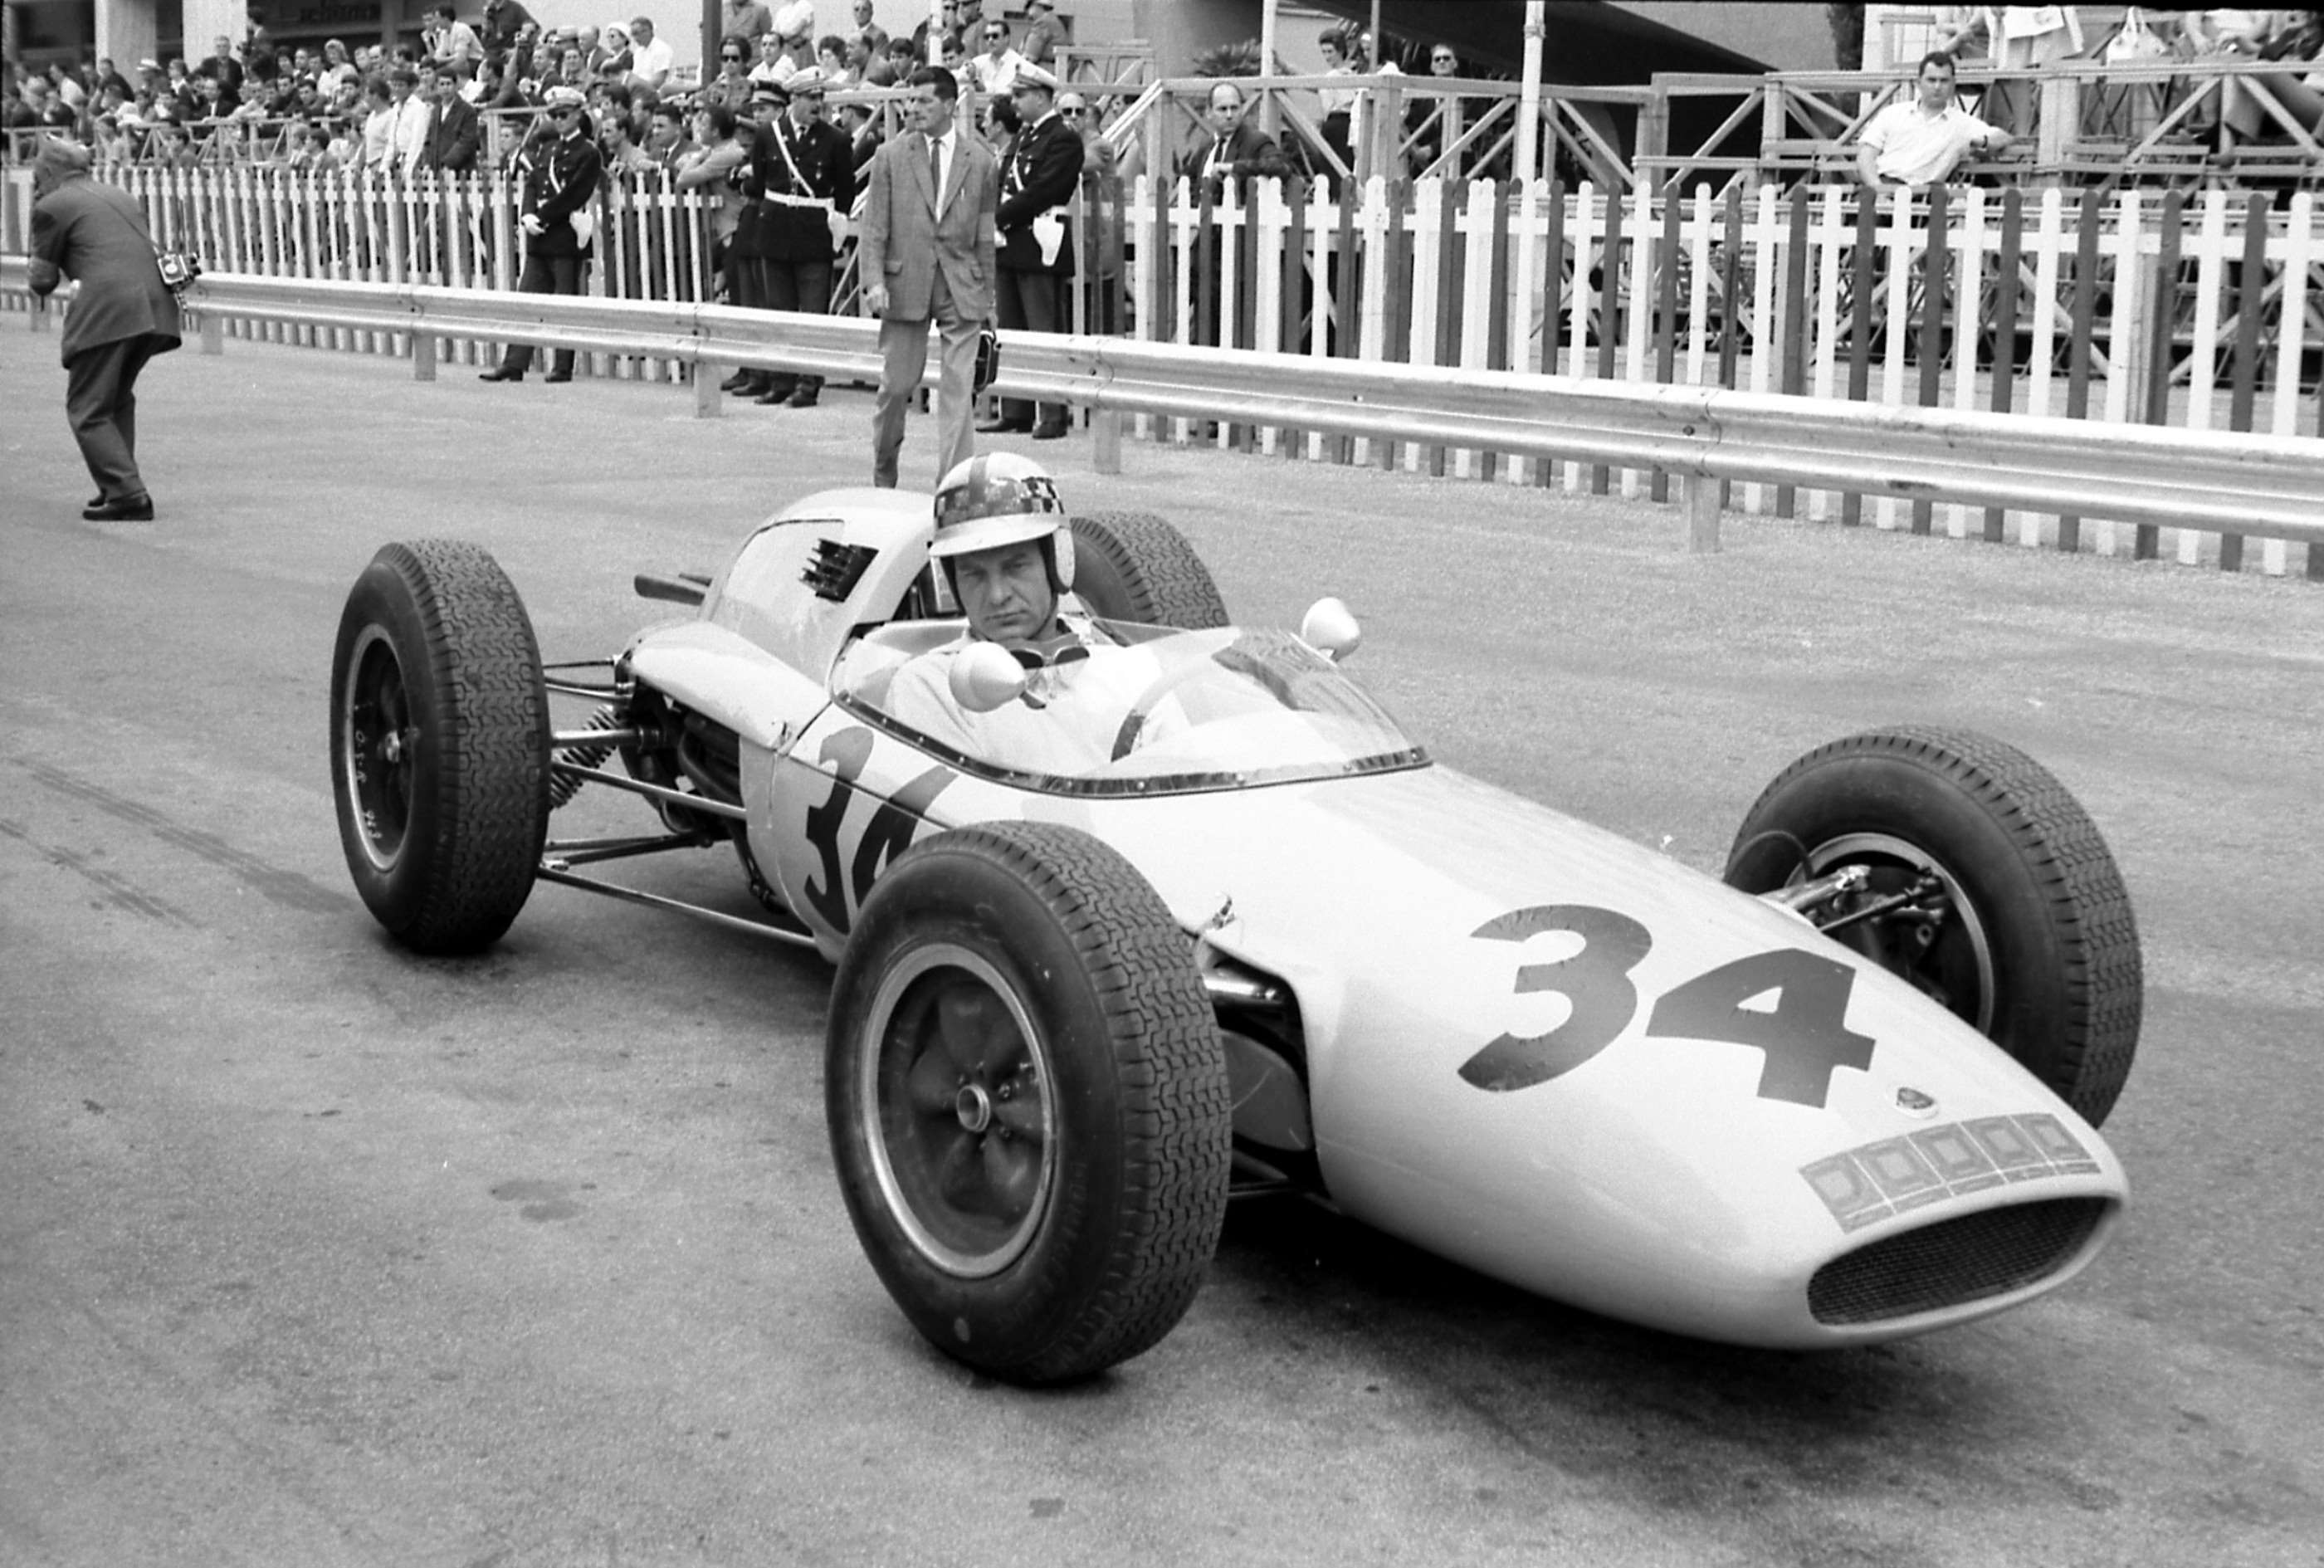 Innes after leaving Team Lotus drove for the UDT-Laystall Racing Team - as here at Monaco, 1962. He was a great crowd favourite who also won the Goodwood TT for them that year in their pale-green Ferrari 250 GTO.